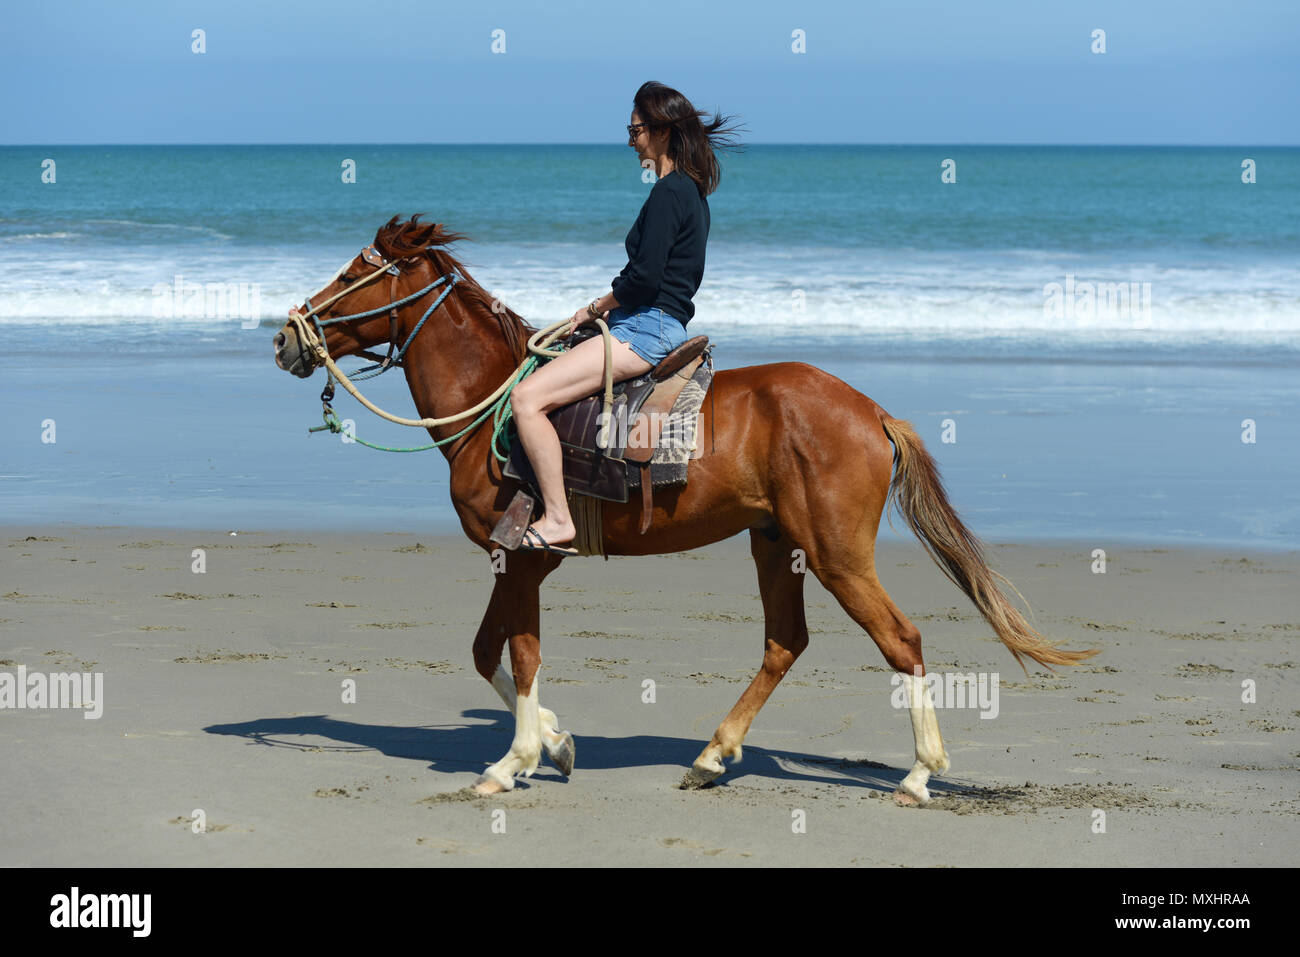 Woman riding on a horse along the ocean shore on a beautiful sunny day Stock Photo